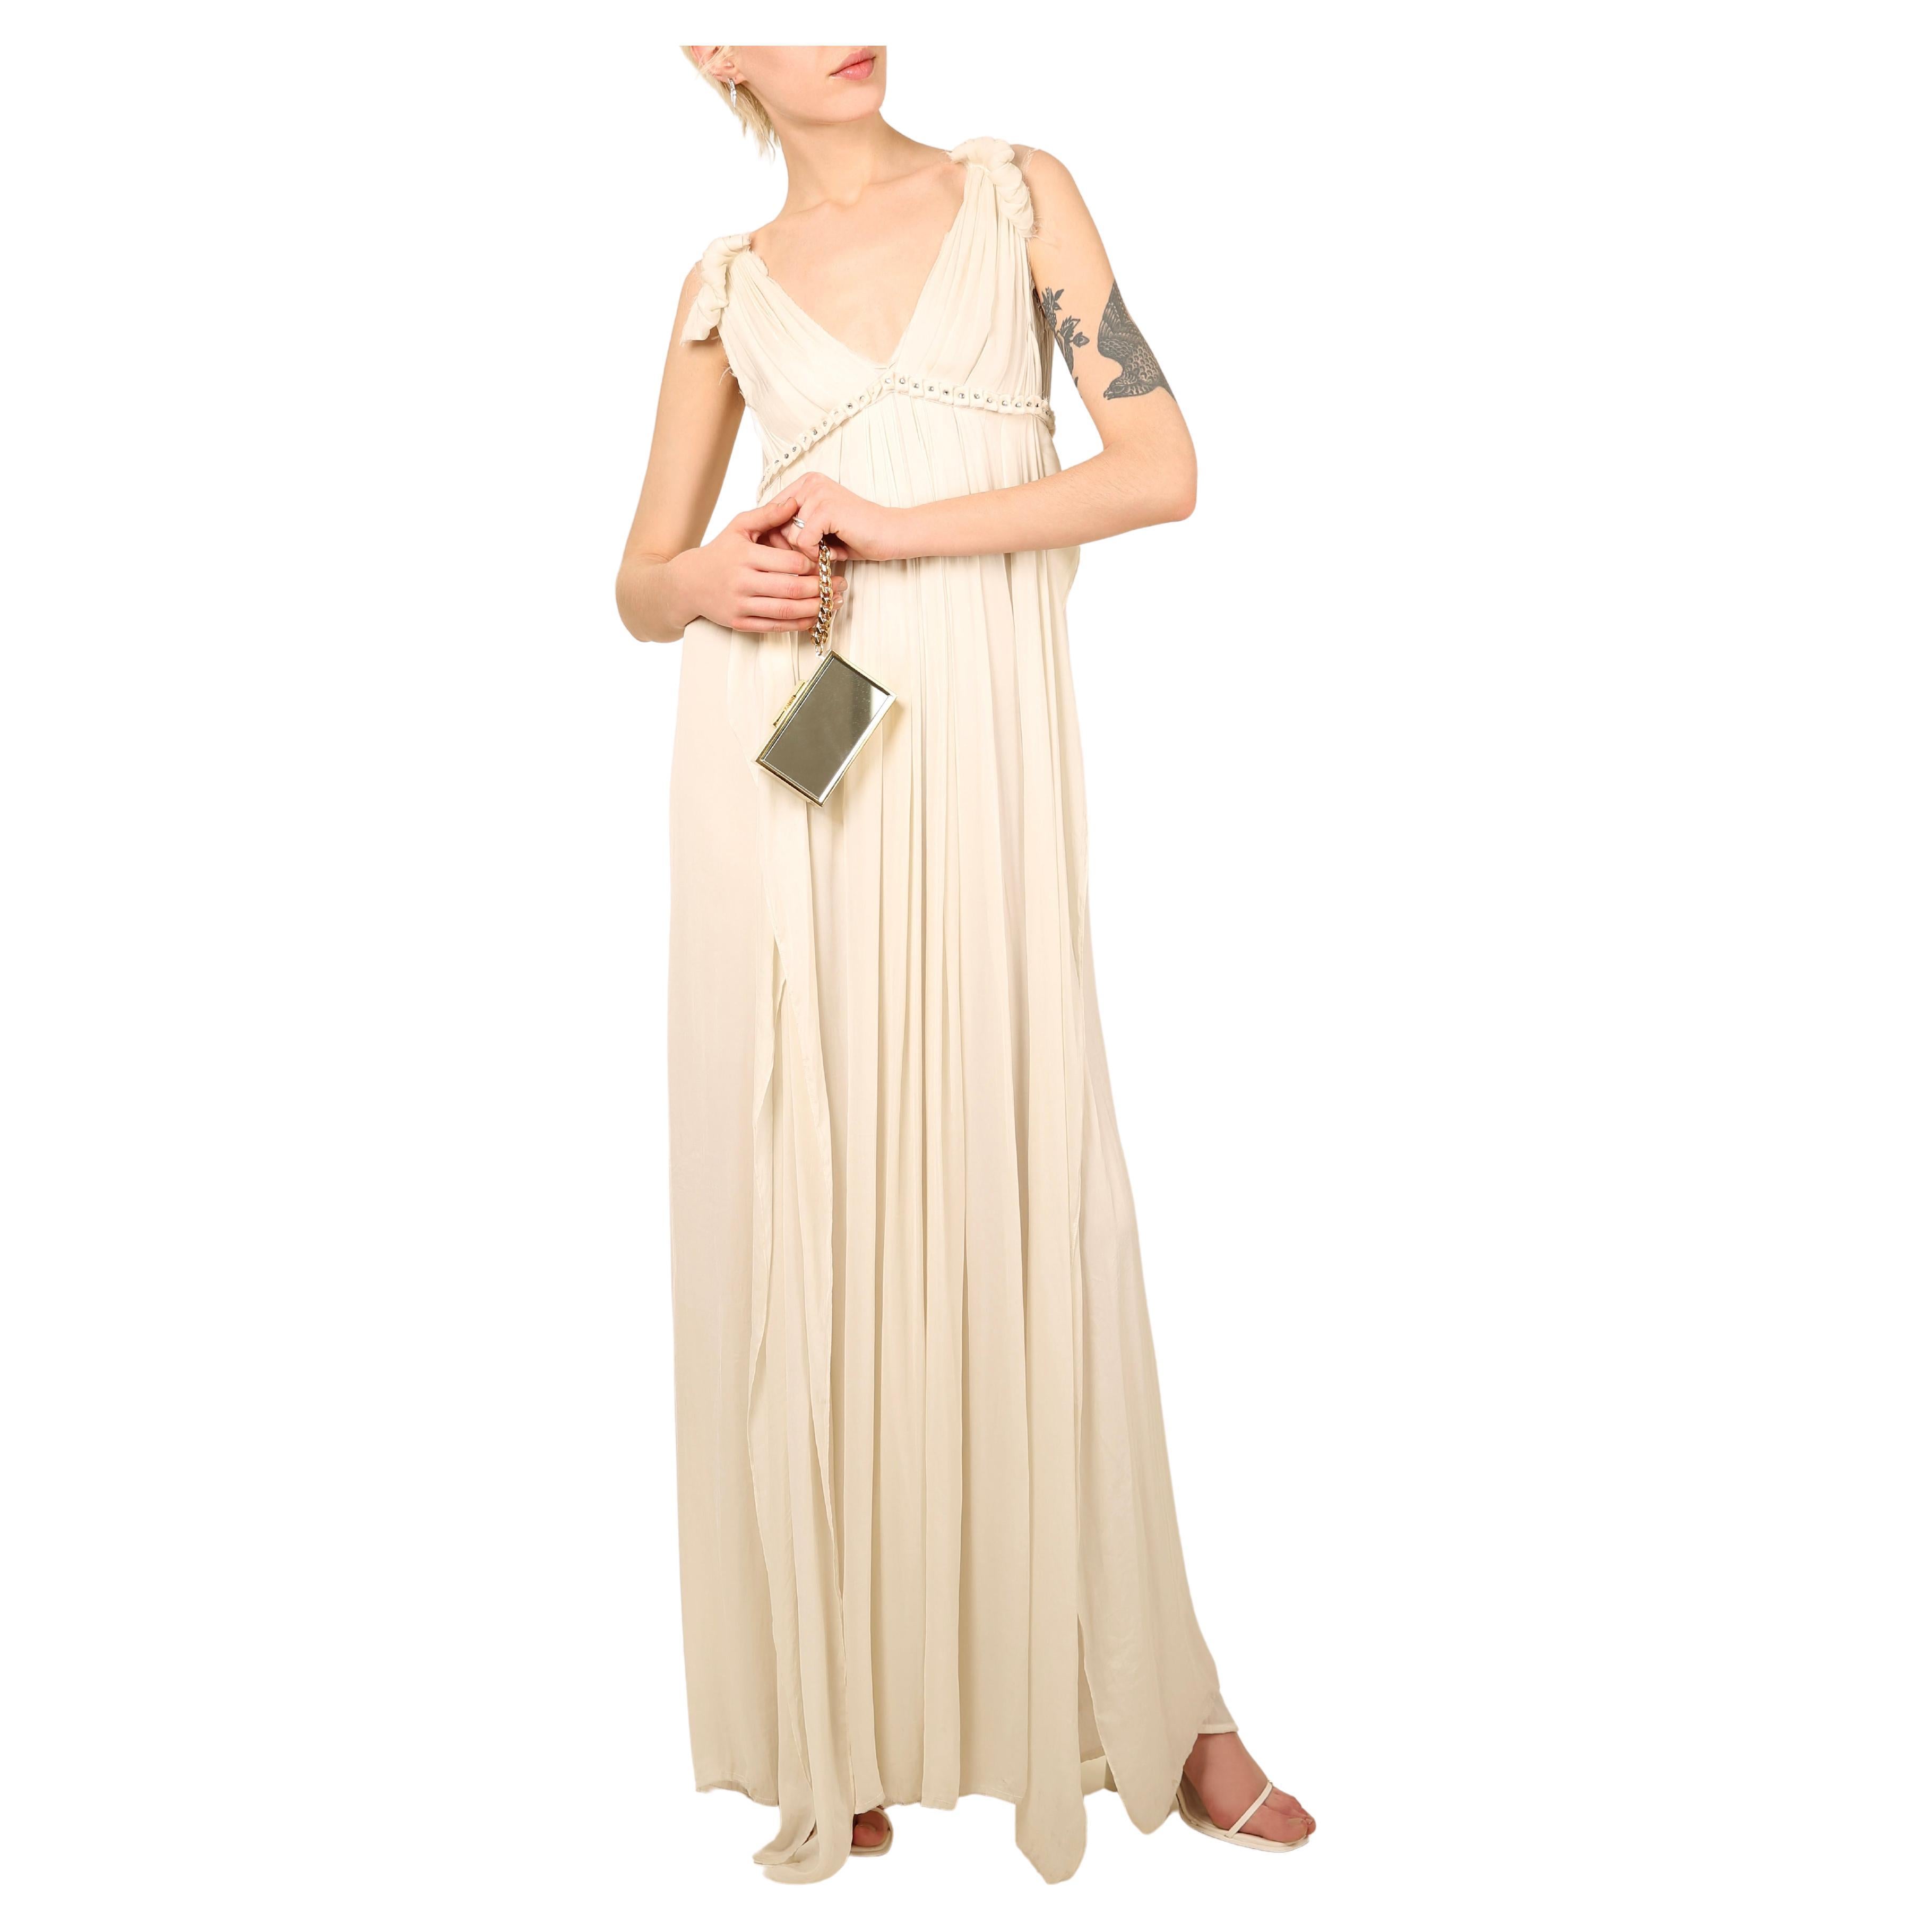 Lanvin white grecian style washed silk crystal embellished wedding dress gown For Sale